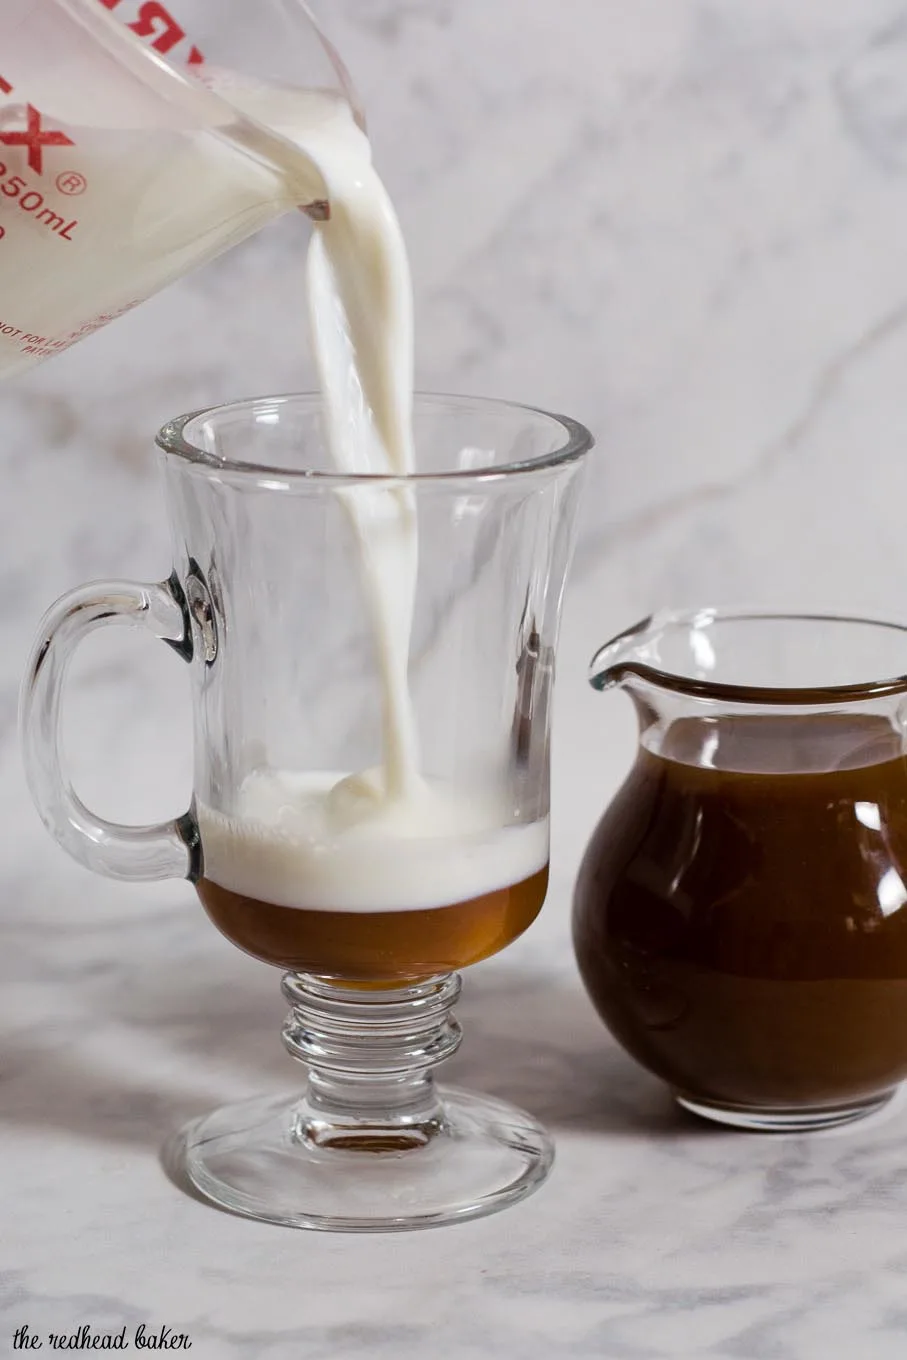 Cold winter day? Warm up with a salted caramel steamer -- warmed milk flavored with homemade salted caramel sauce. Kids and adults alike will love it!